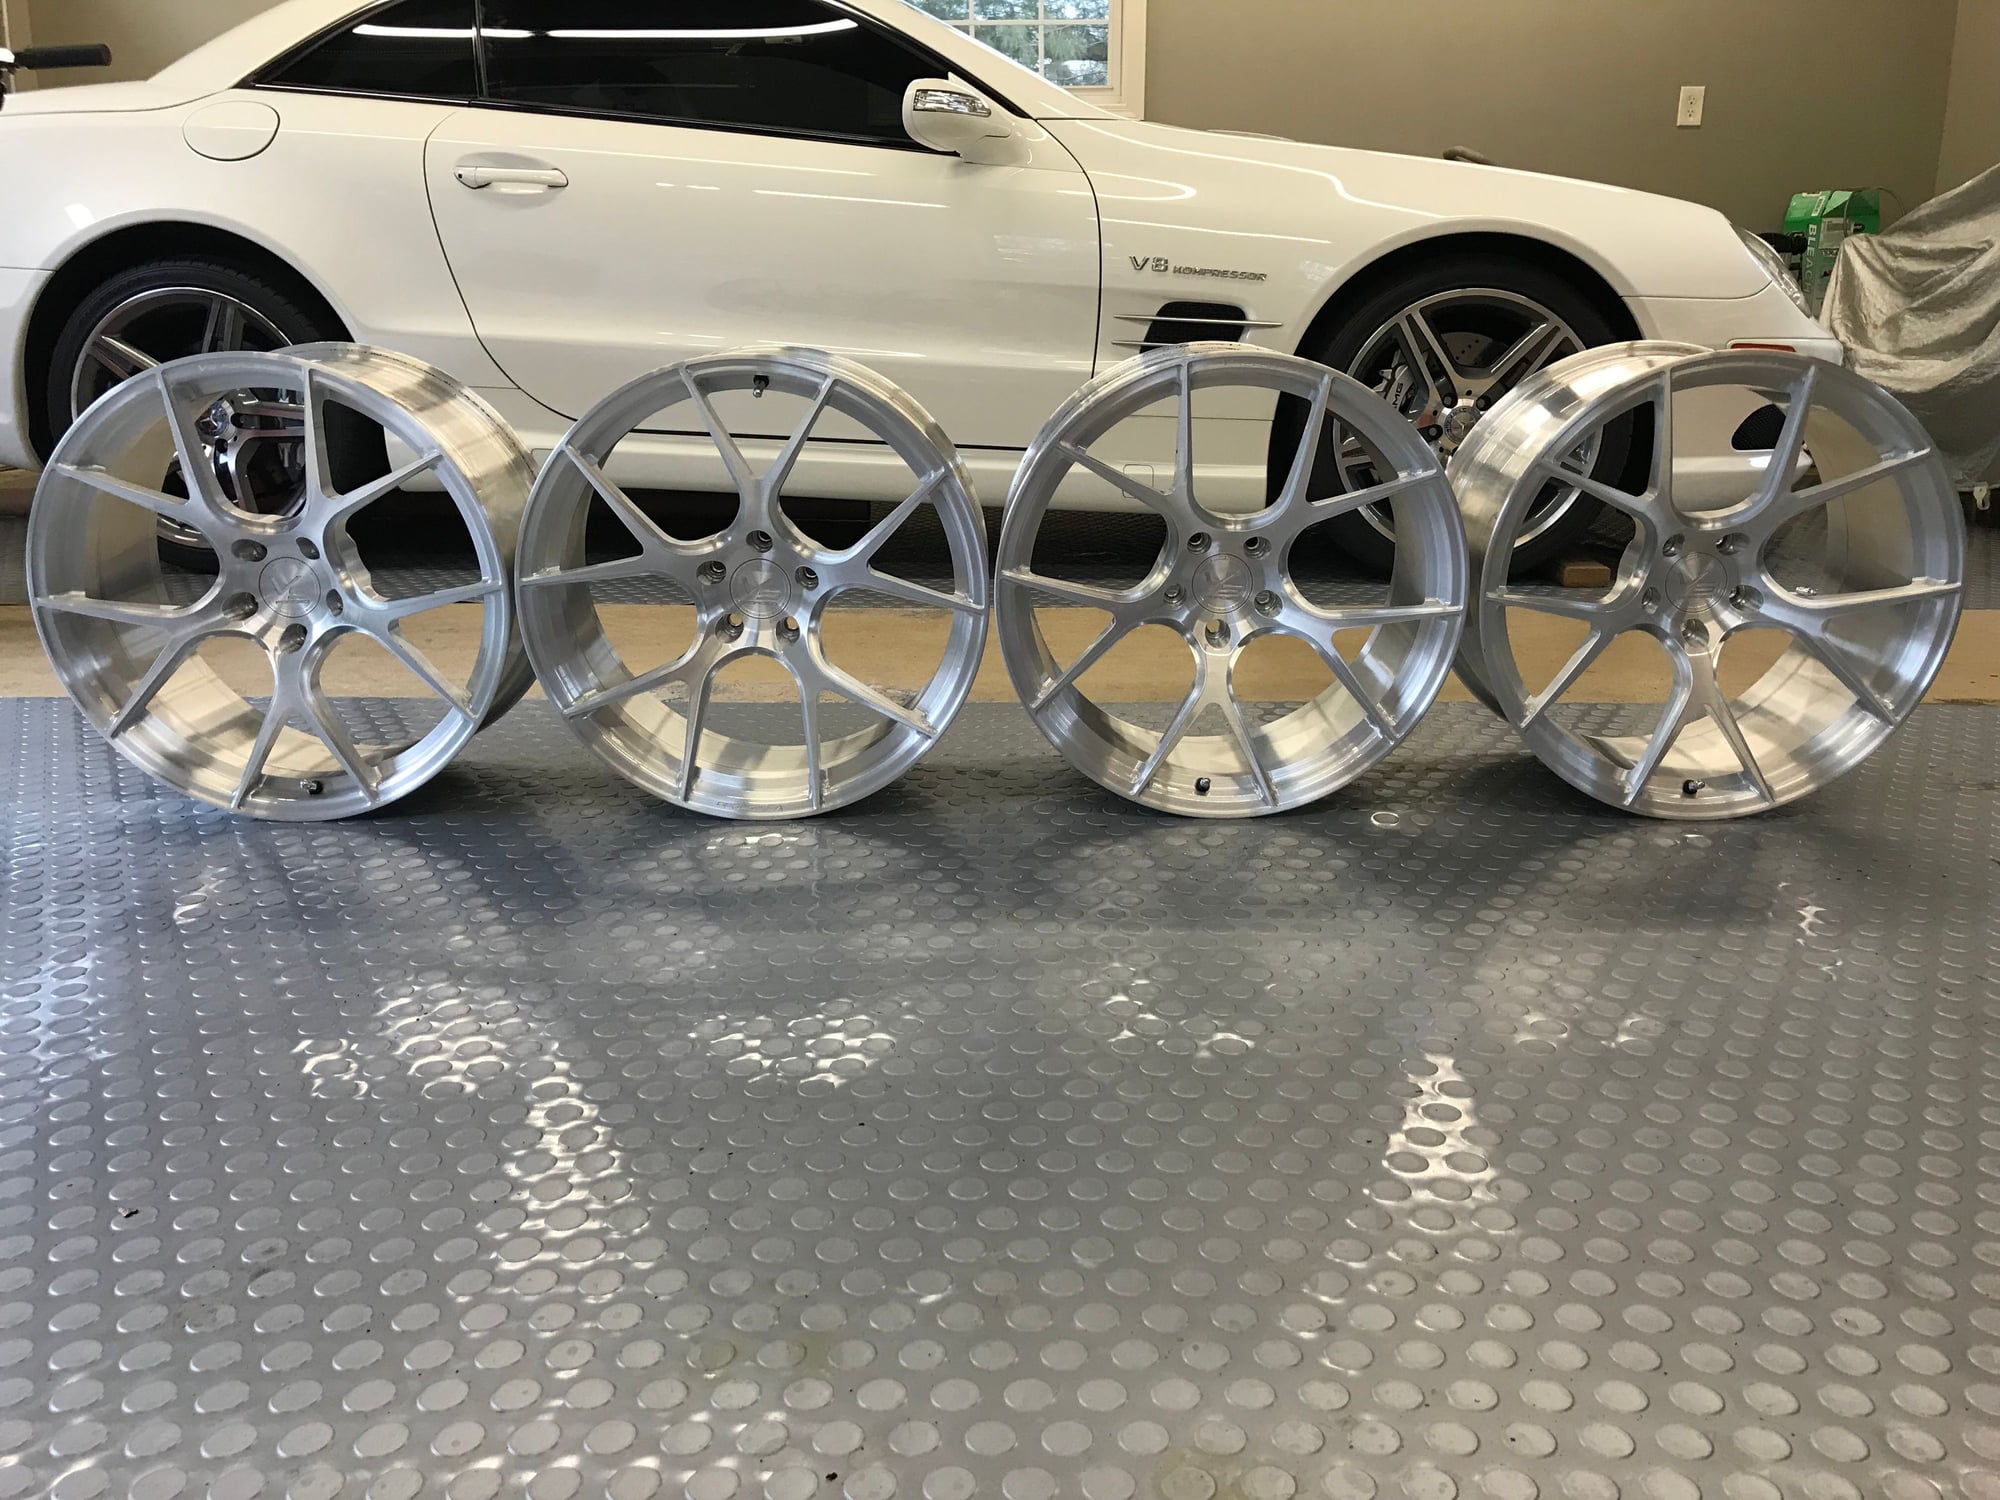 Wheels and Tires/Axles - Brand New VS Forged VS02 Wheels for R230 - Brushed Clear Finish - $1,950 - New - 2003 to 2008 Mercedes-Benz SL55 AMG - 2003 to 2008 Mercedes-Benz SL65 AMG - 2009 to 2012 Mercedes-Benz SL63 AMG - Fairfield, CT 06824, United States